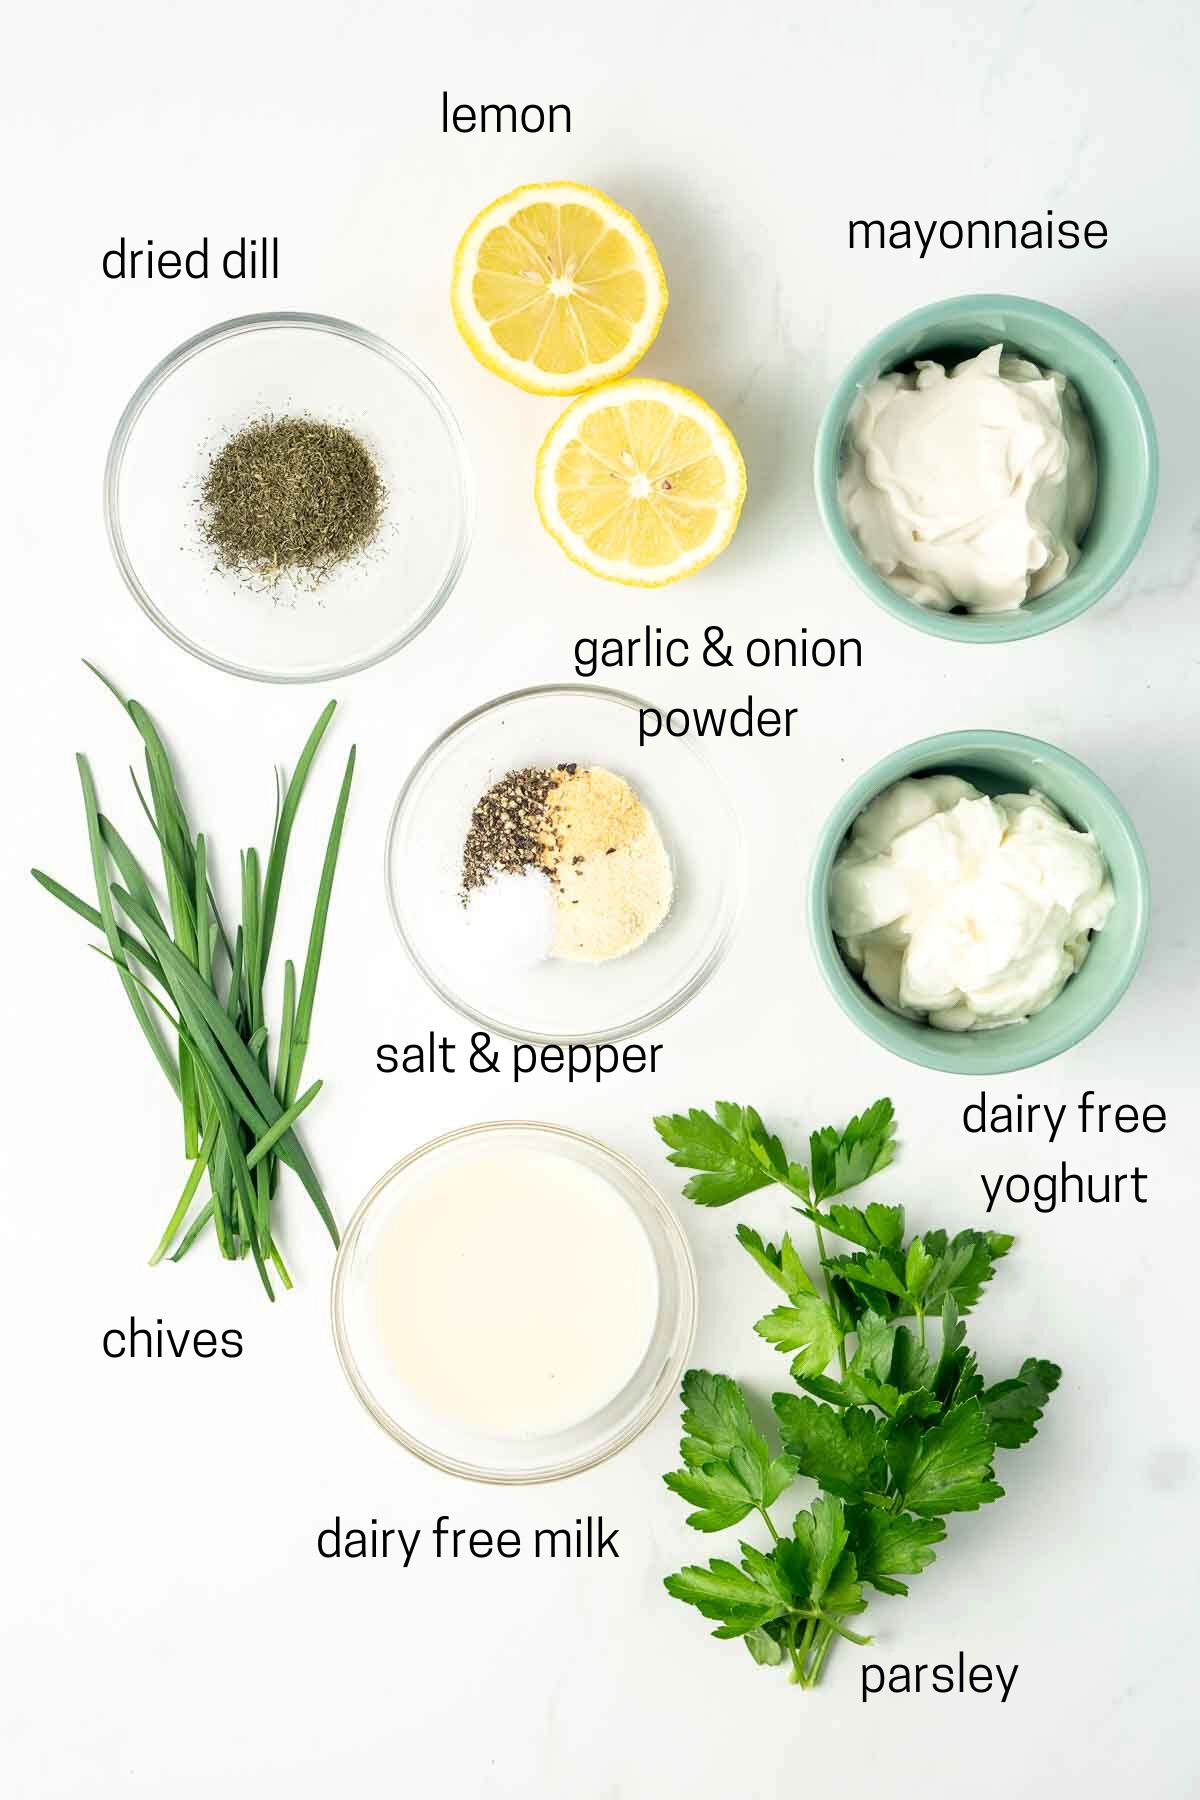 All ingredients needed for dairy free ranch laid out in small bowls.